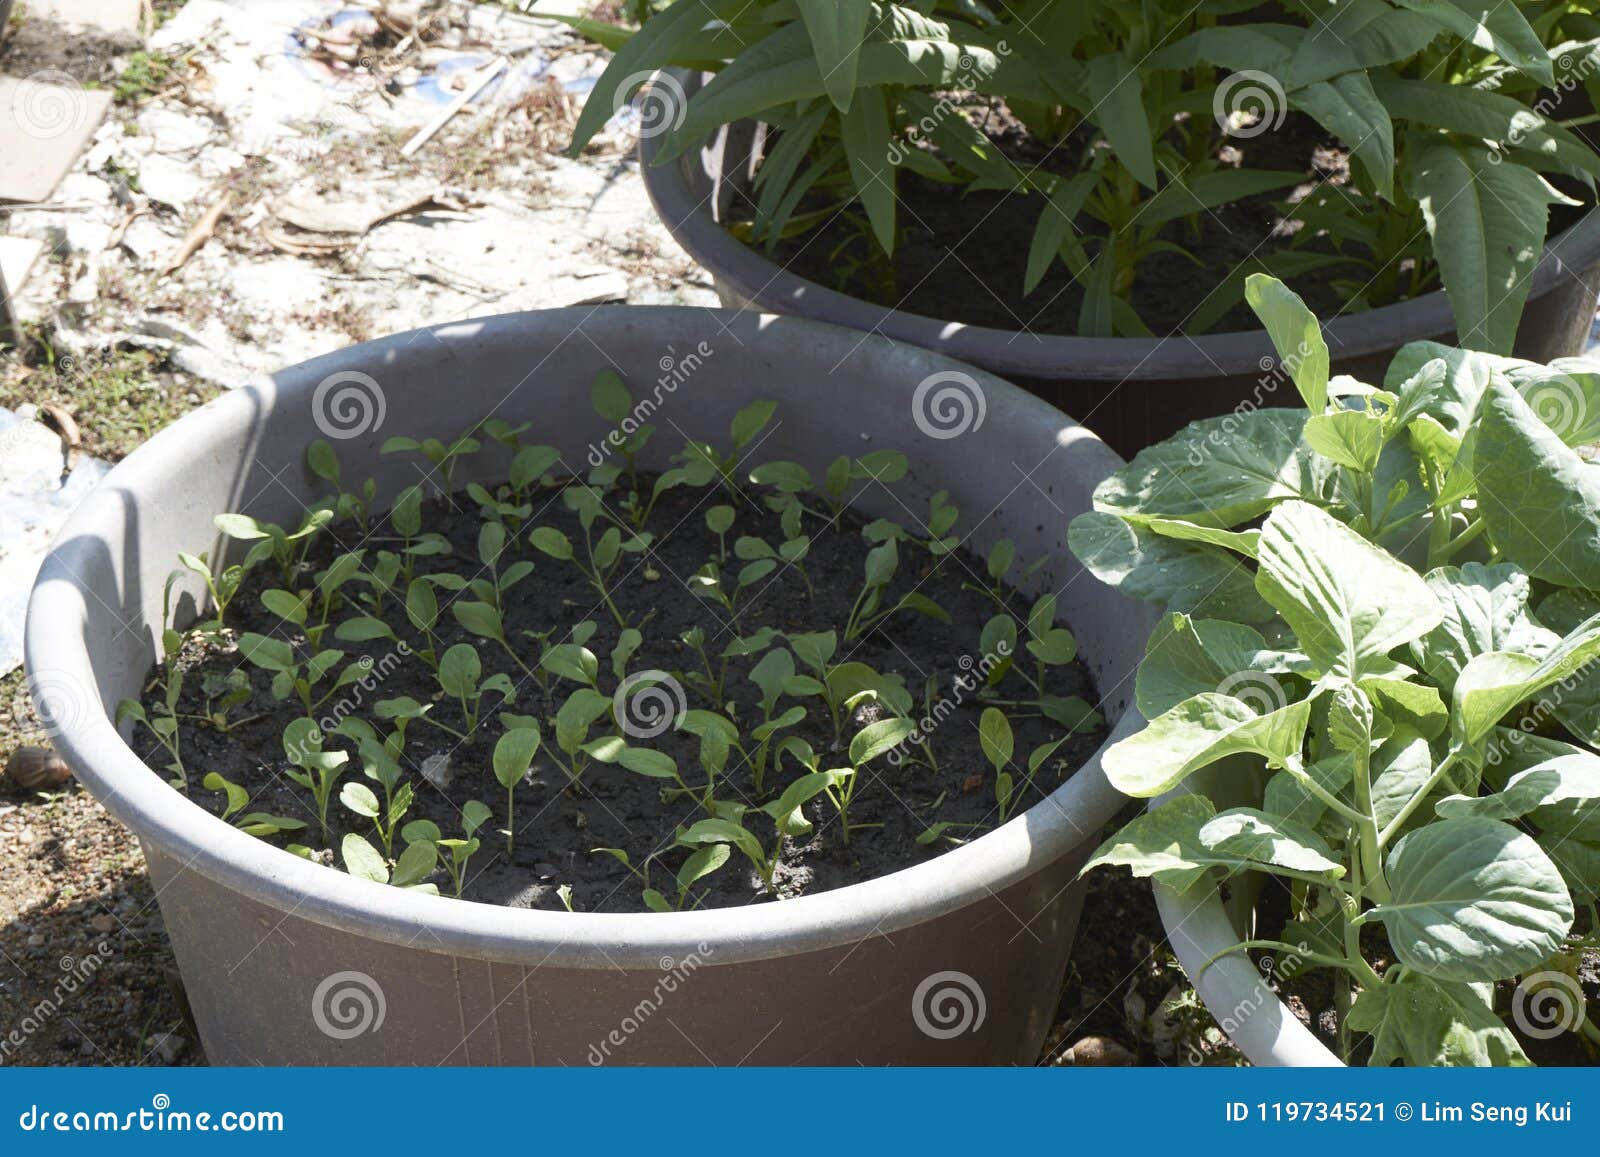 Growing Vegetable At Front Or Back Yard Stock Image - Image of farmer